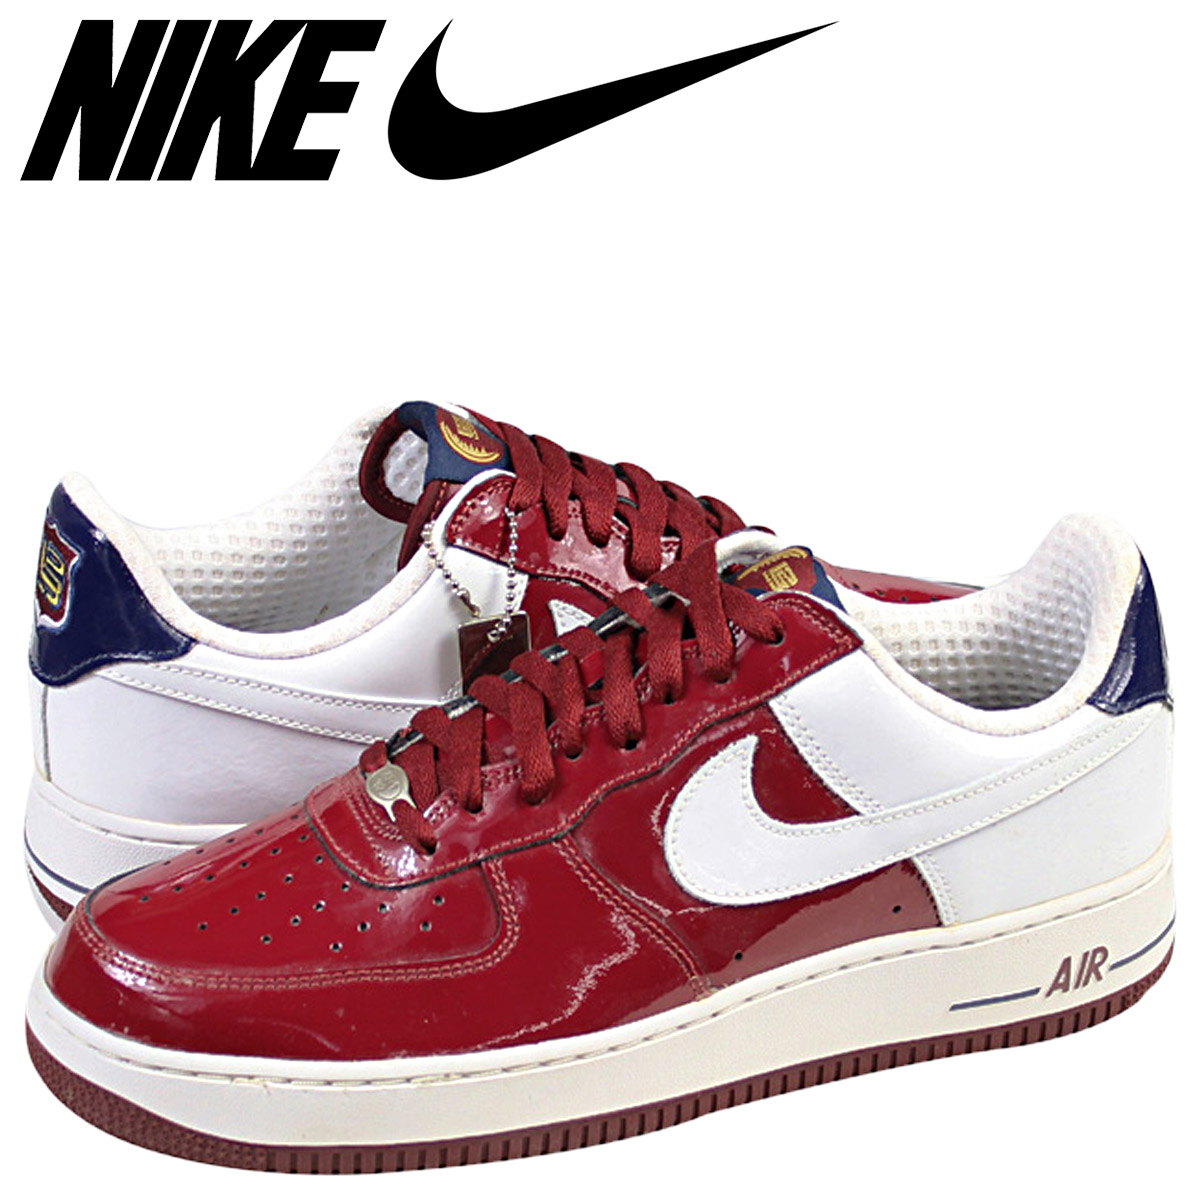 air force one lebron james